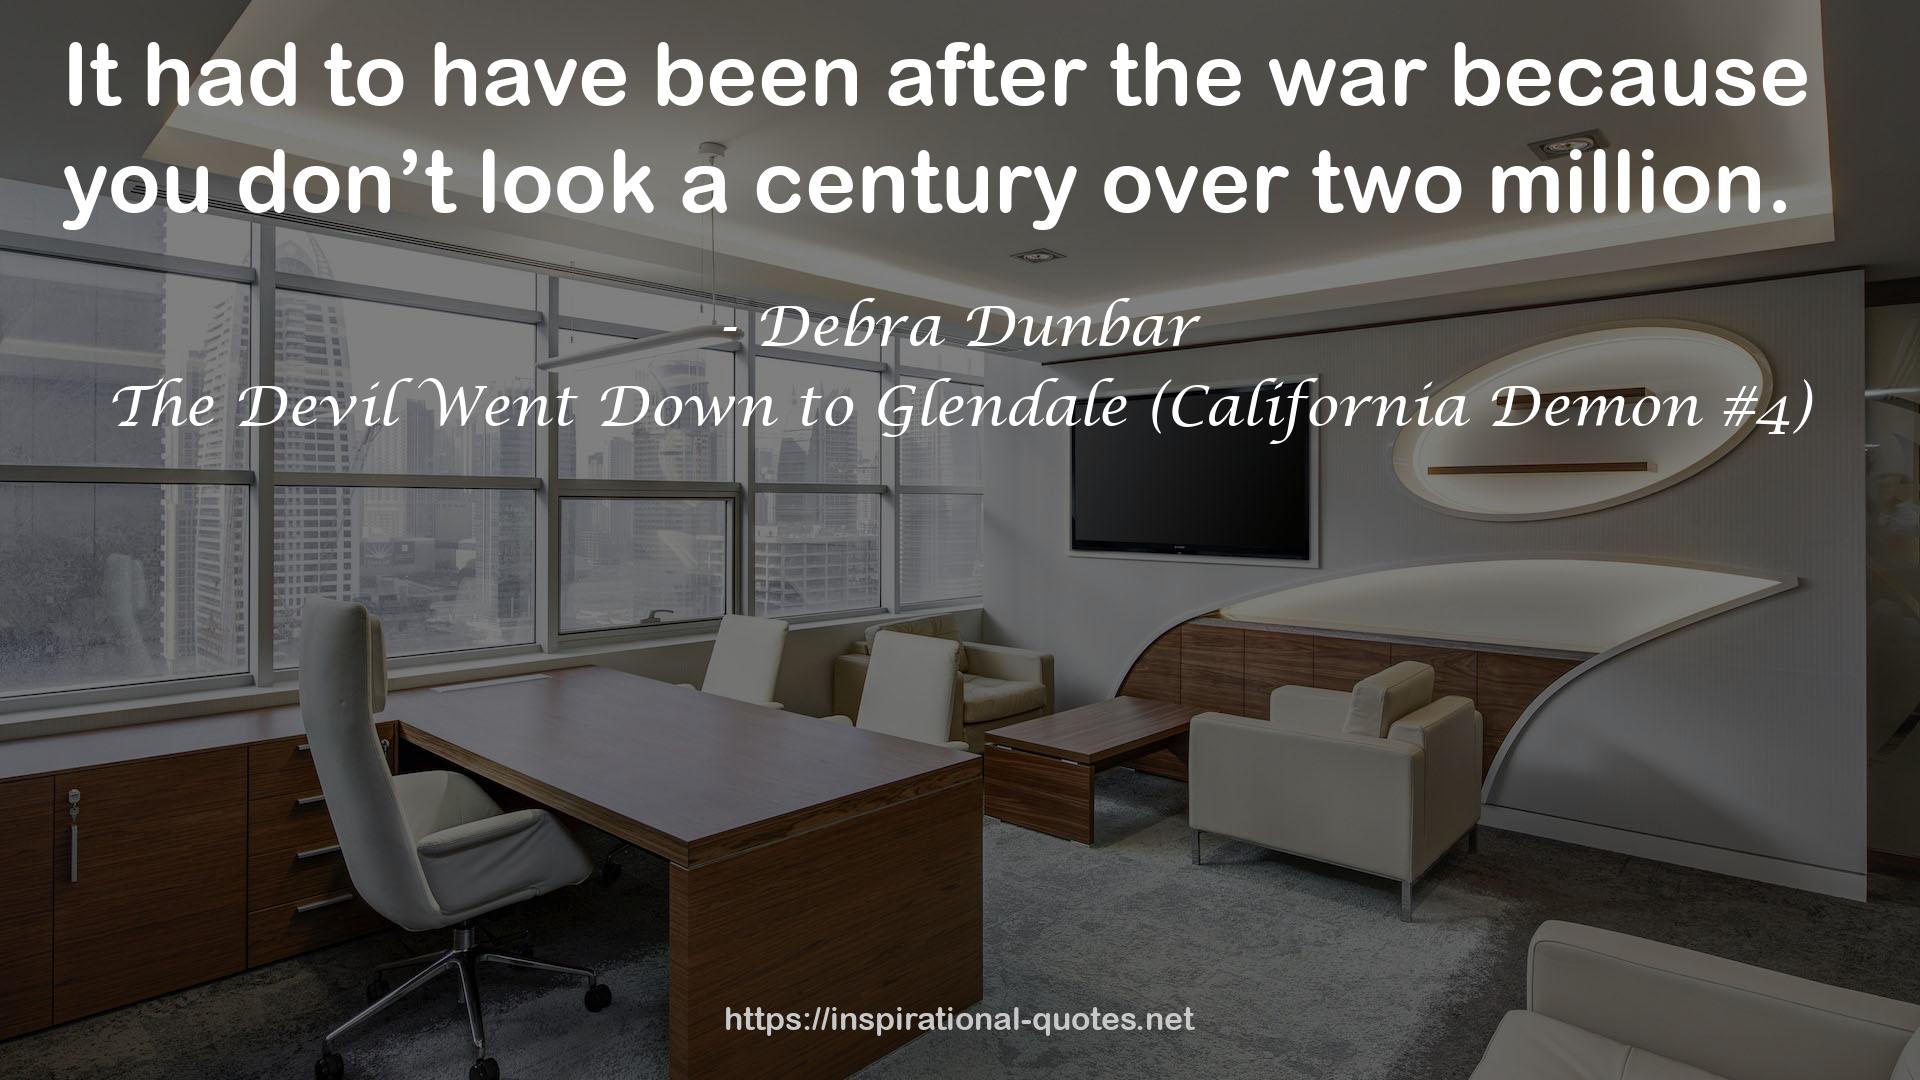 The Devil Went Down to Glendale (California Demon #4) QUOTES